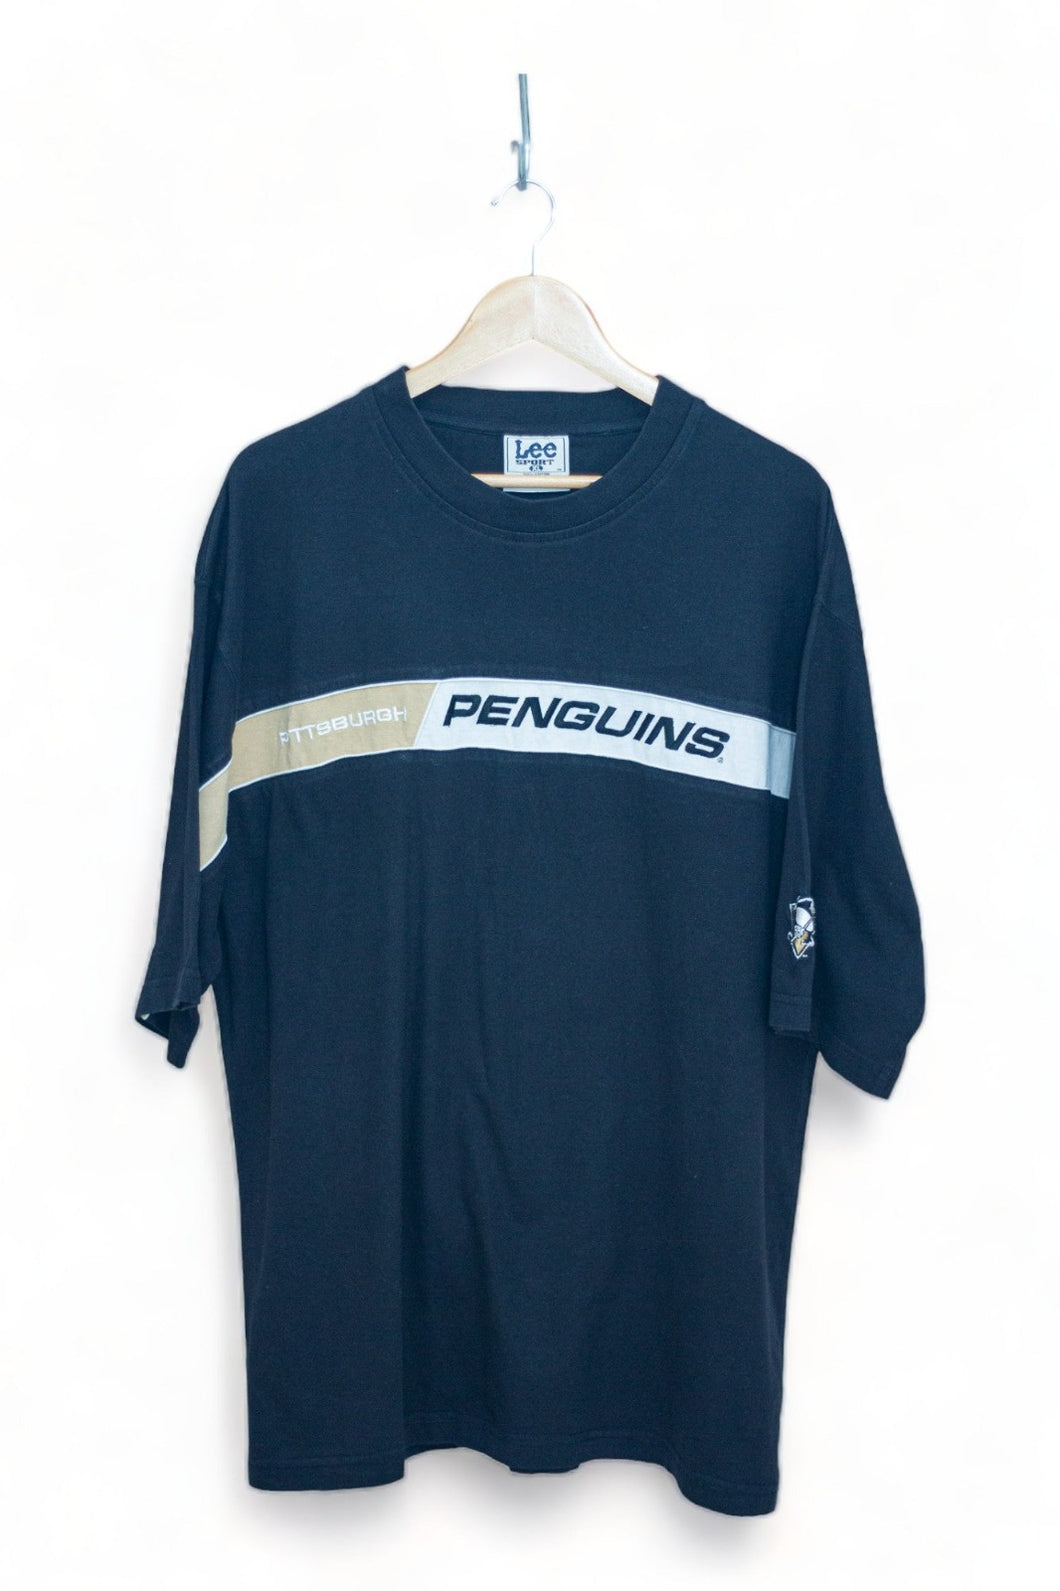 Pittsburgh Penguins - Embroidered Spell Out T-Shirt (XL)